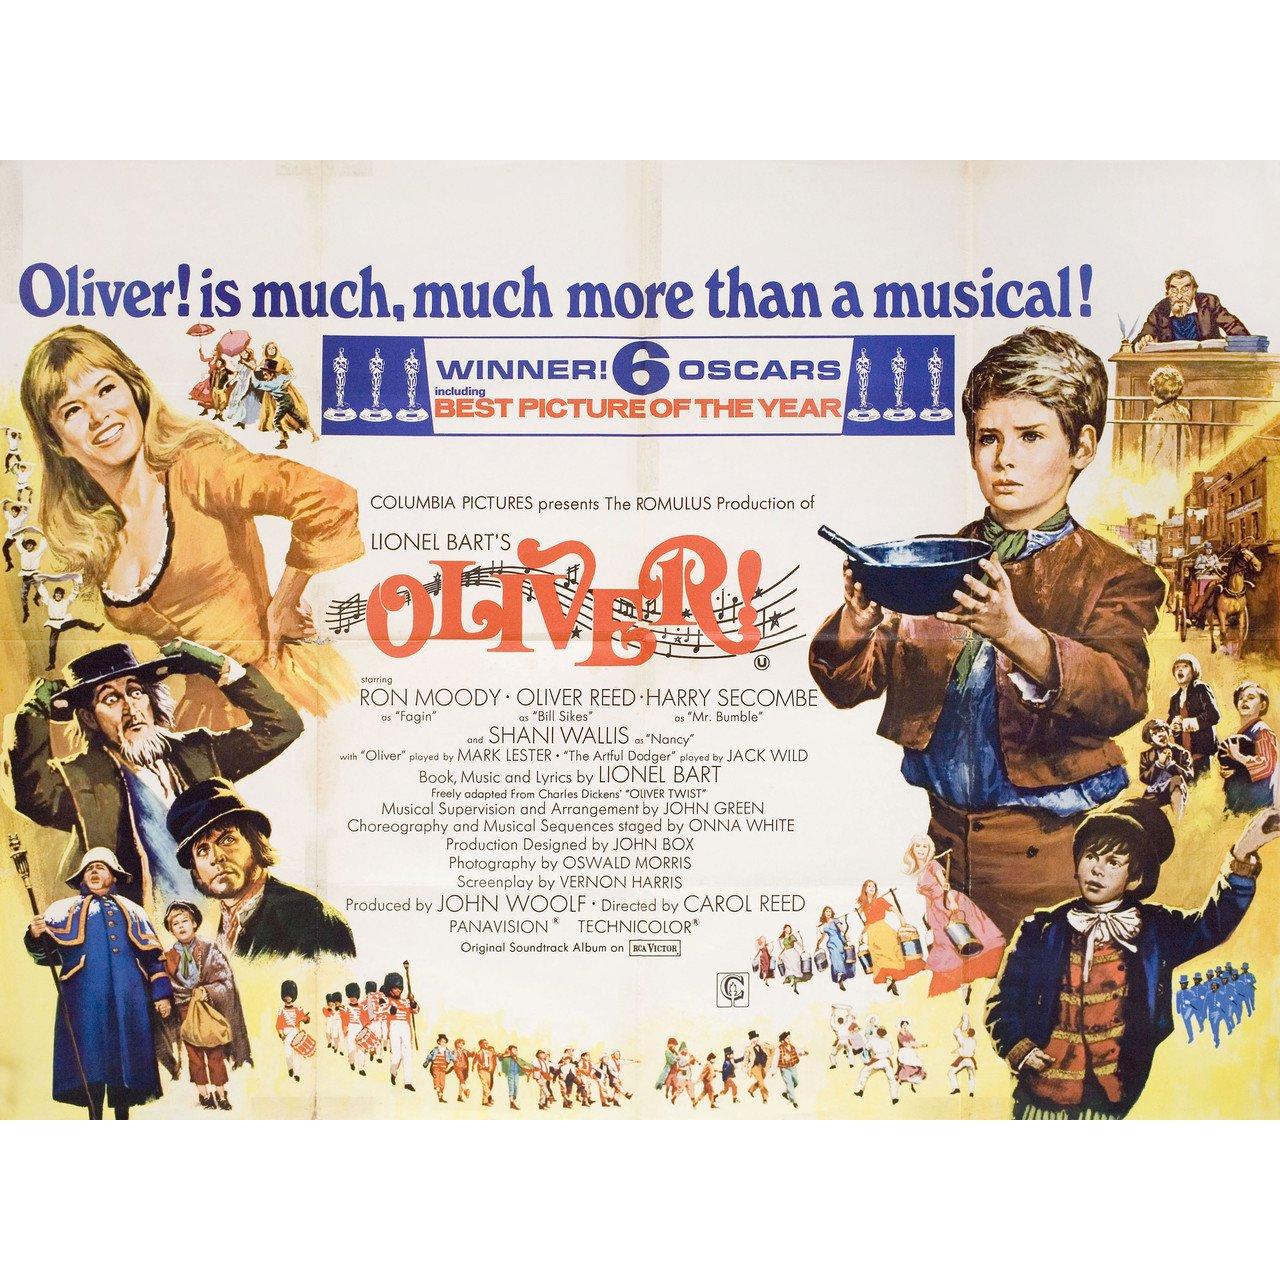 Original 1968 British quad poster for the film Oliver! directed by Carol Reed with Ron Moody / Shani Wallis / Oliver Reed / Harry Secombe. Good very good condition, folded with tape stains on rear. Many original posters were issued folded or were